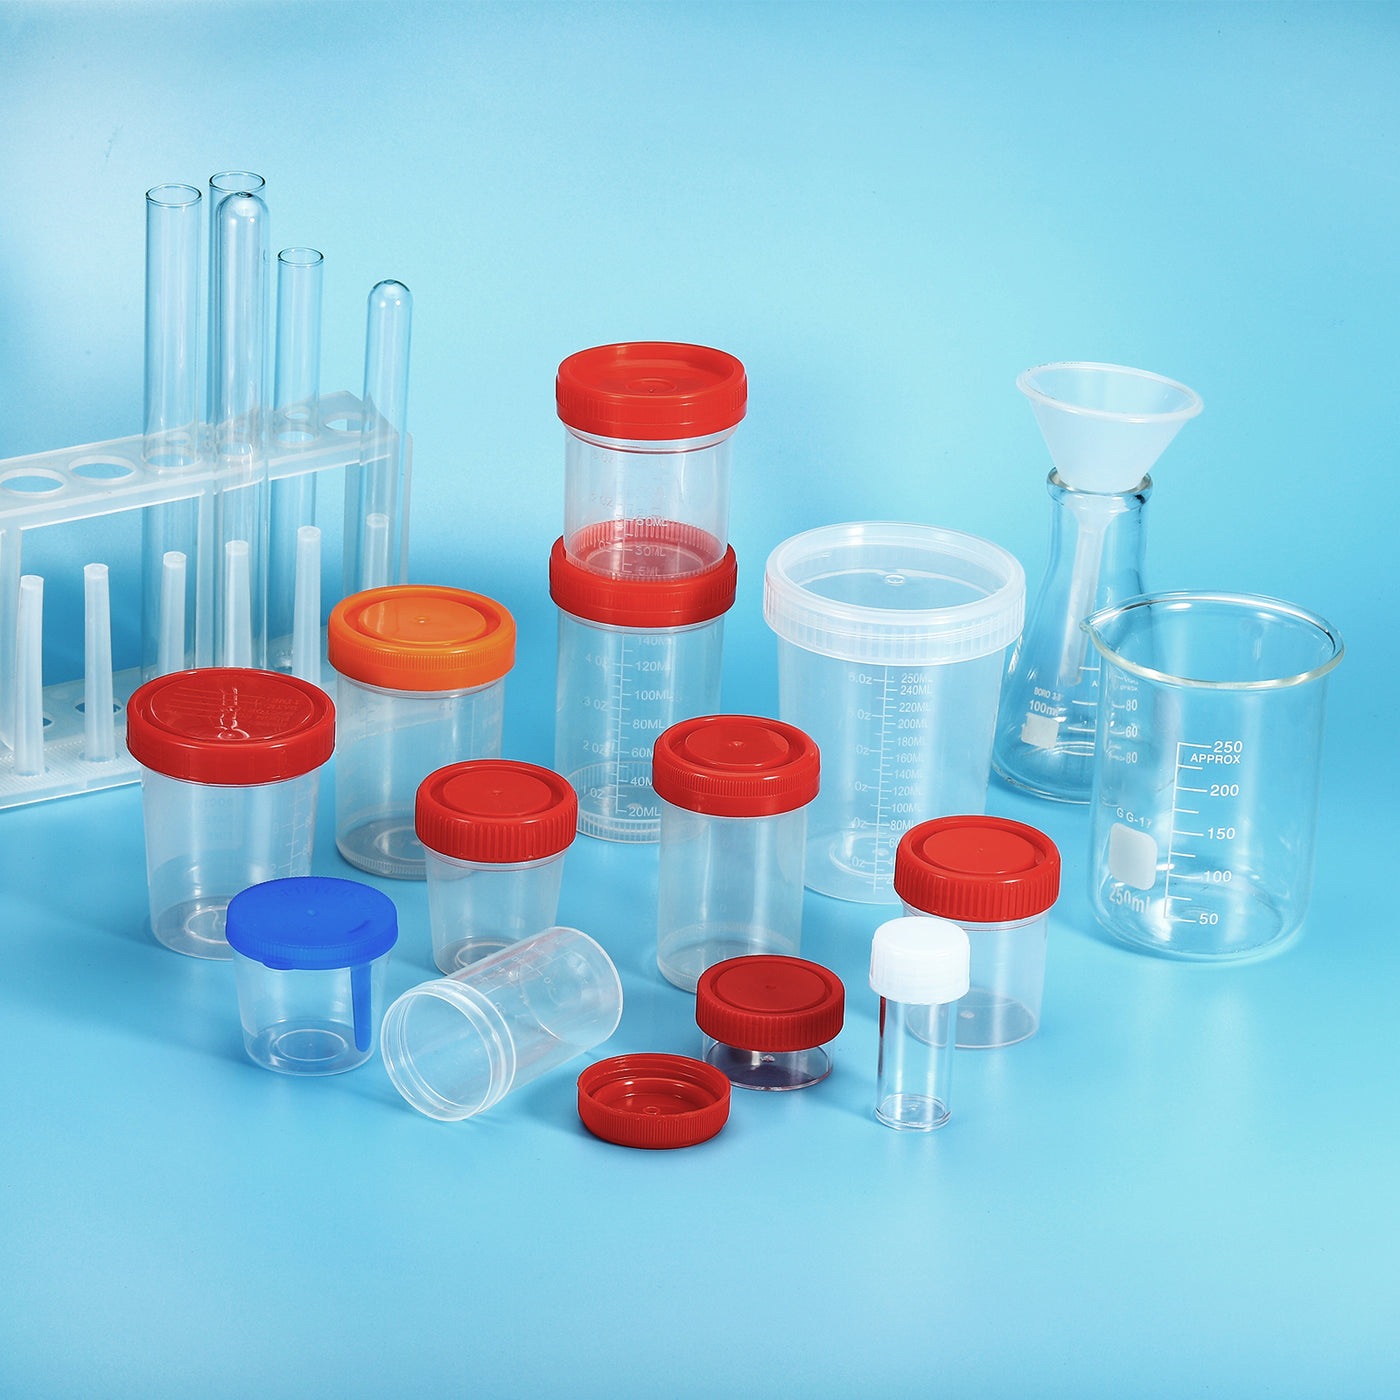 Harfington 60mL 120mL Sample Cups Sample Containers Leak Proof Screw Cap for Lab Home Red